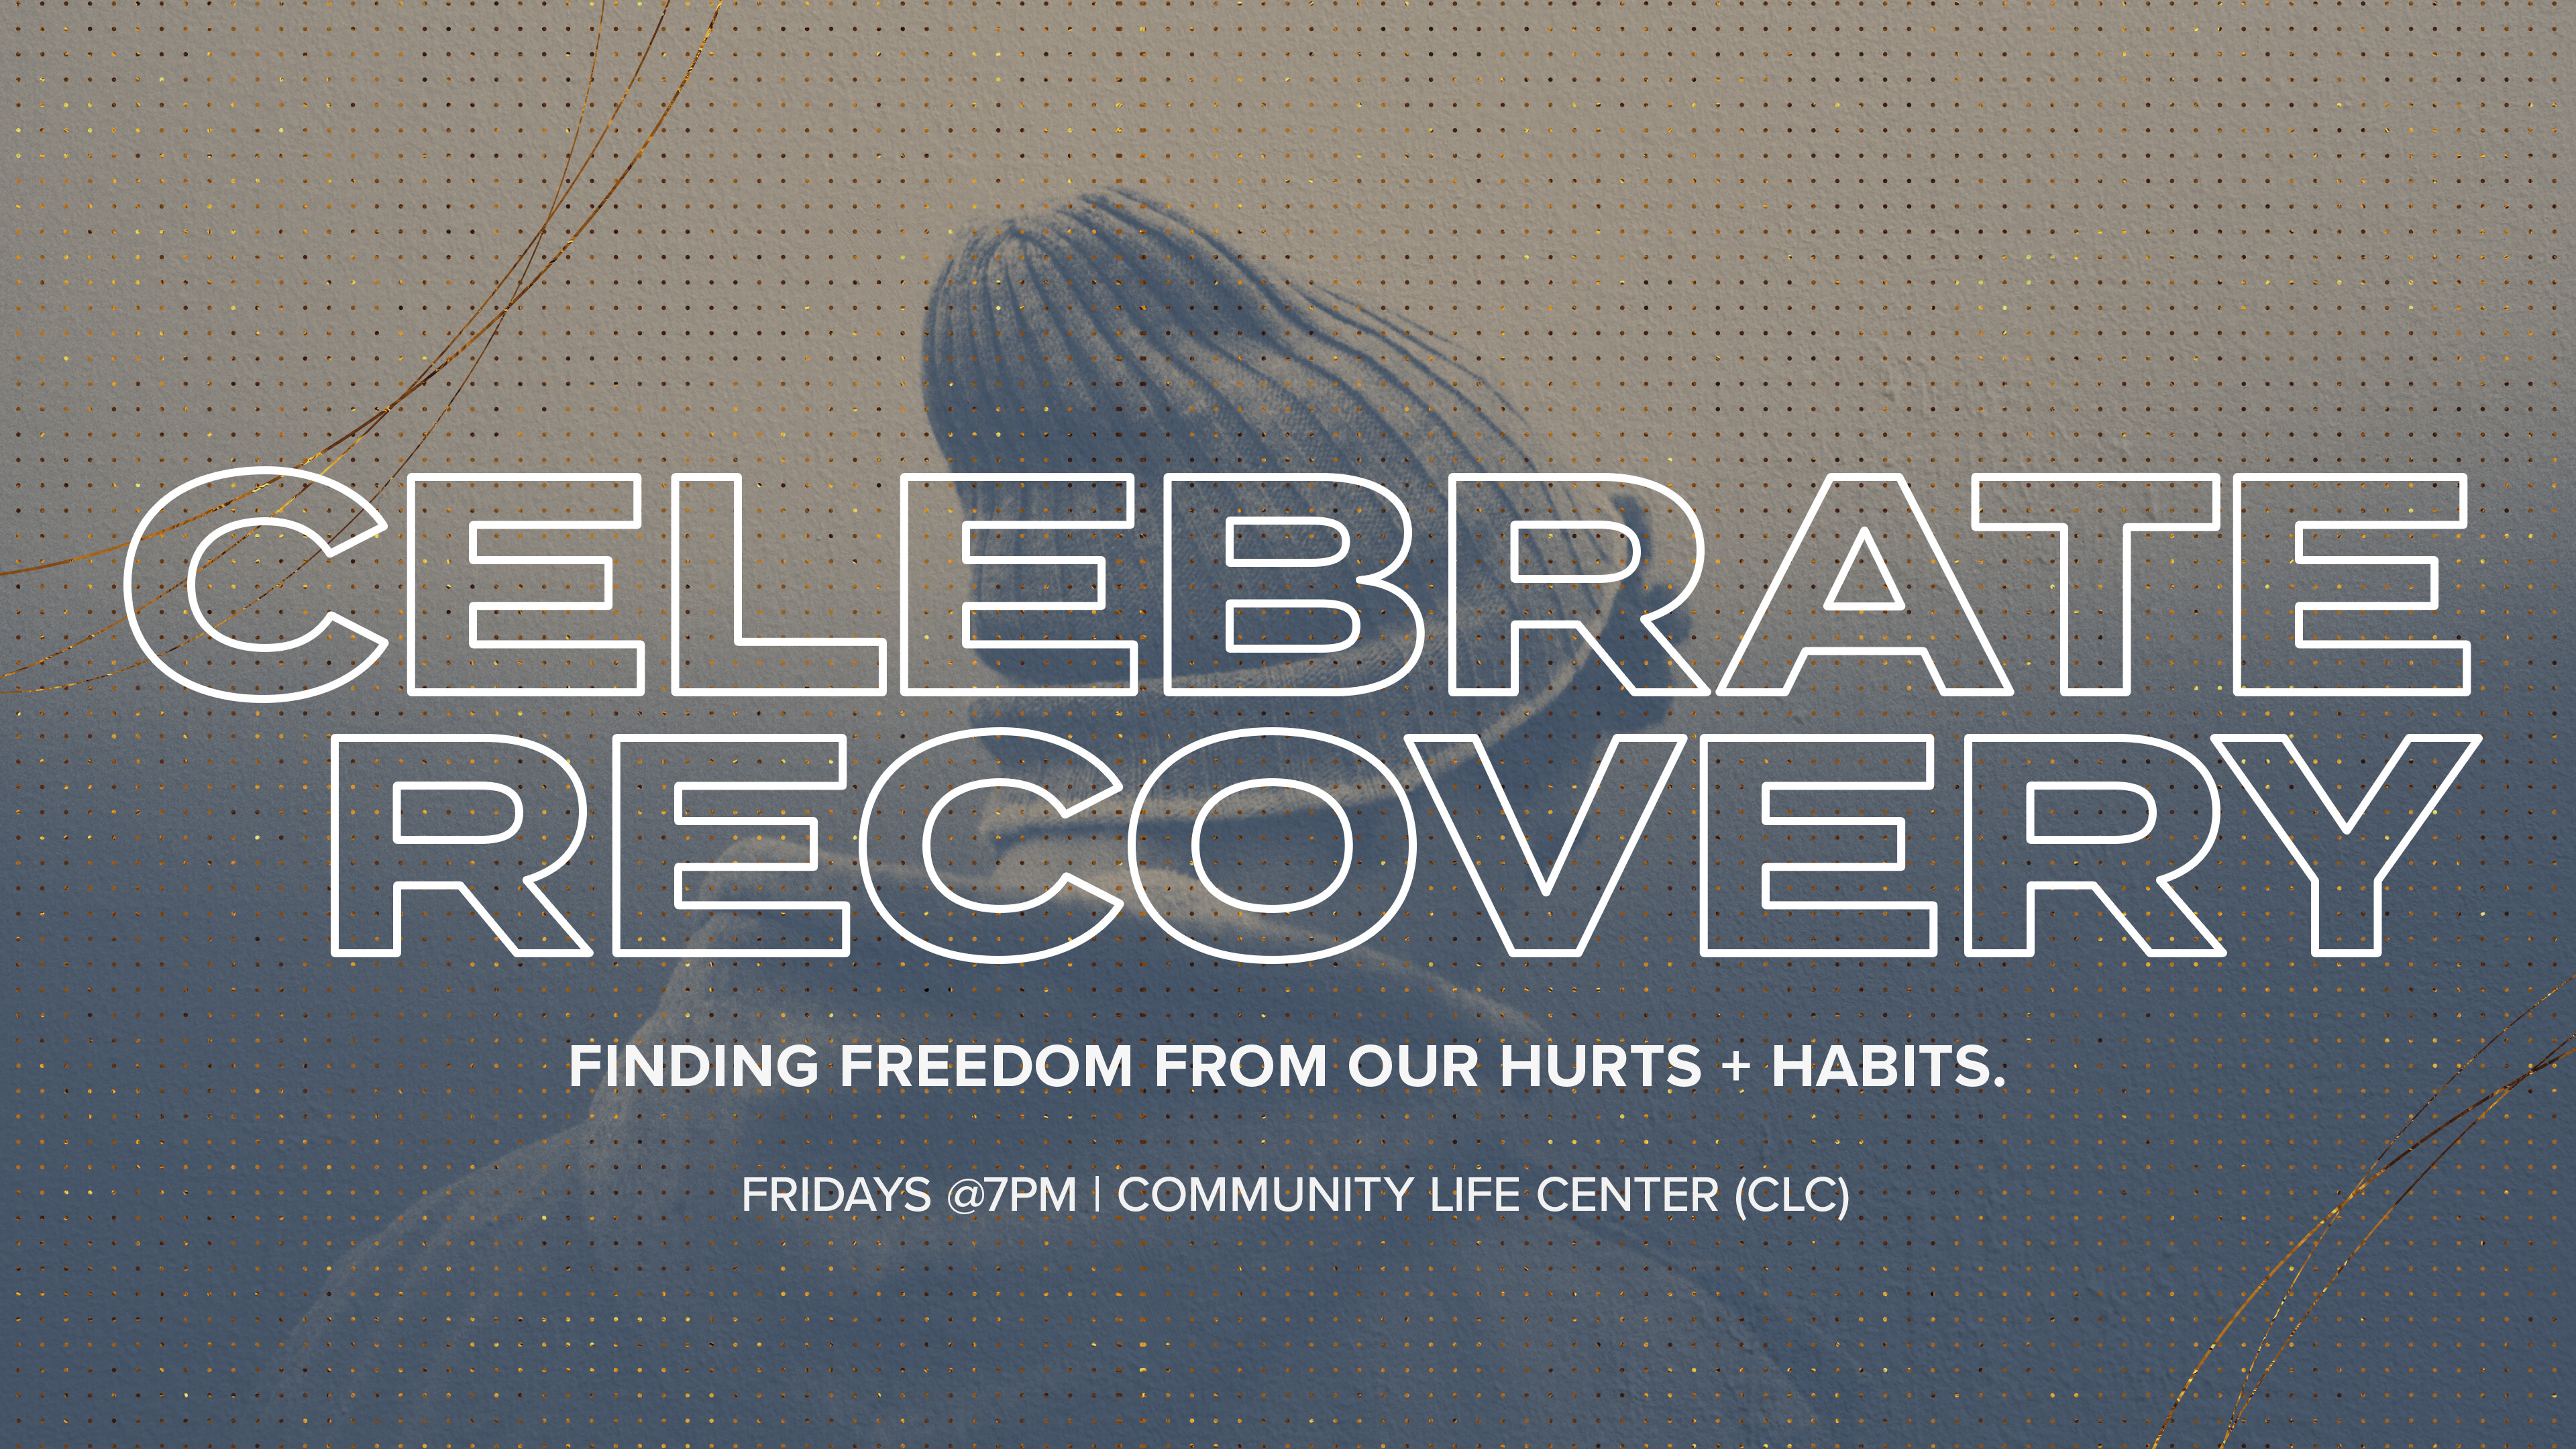 CELEBRATE RECOVERY